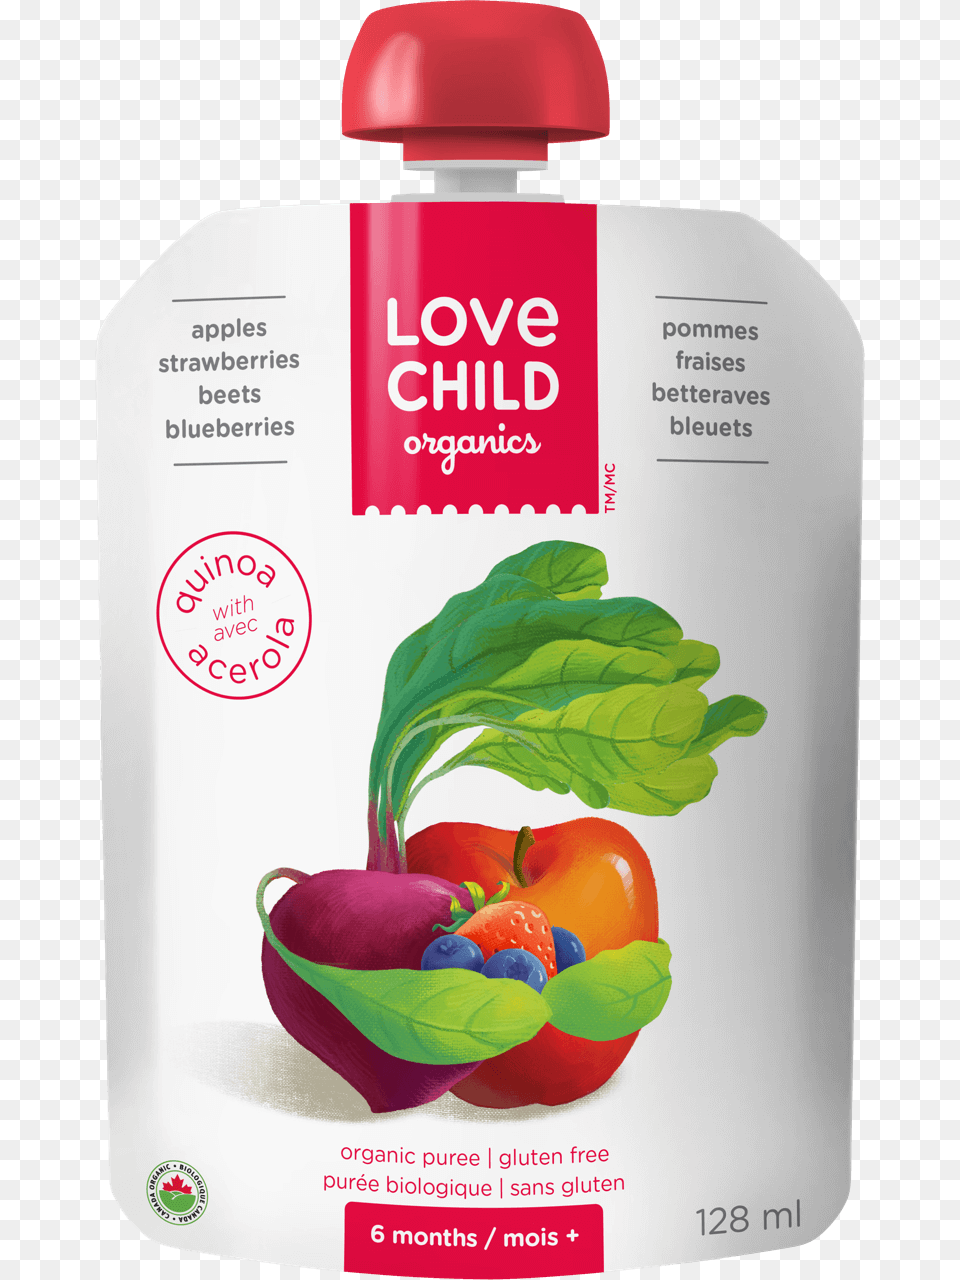 Strawberries Beets Blueberries Love Child Organics Baby Food Pouch With Quinoa, Herbal, Herbs, Plant, Advertisement Free Png